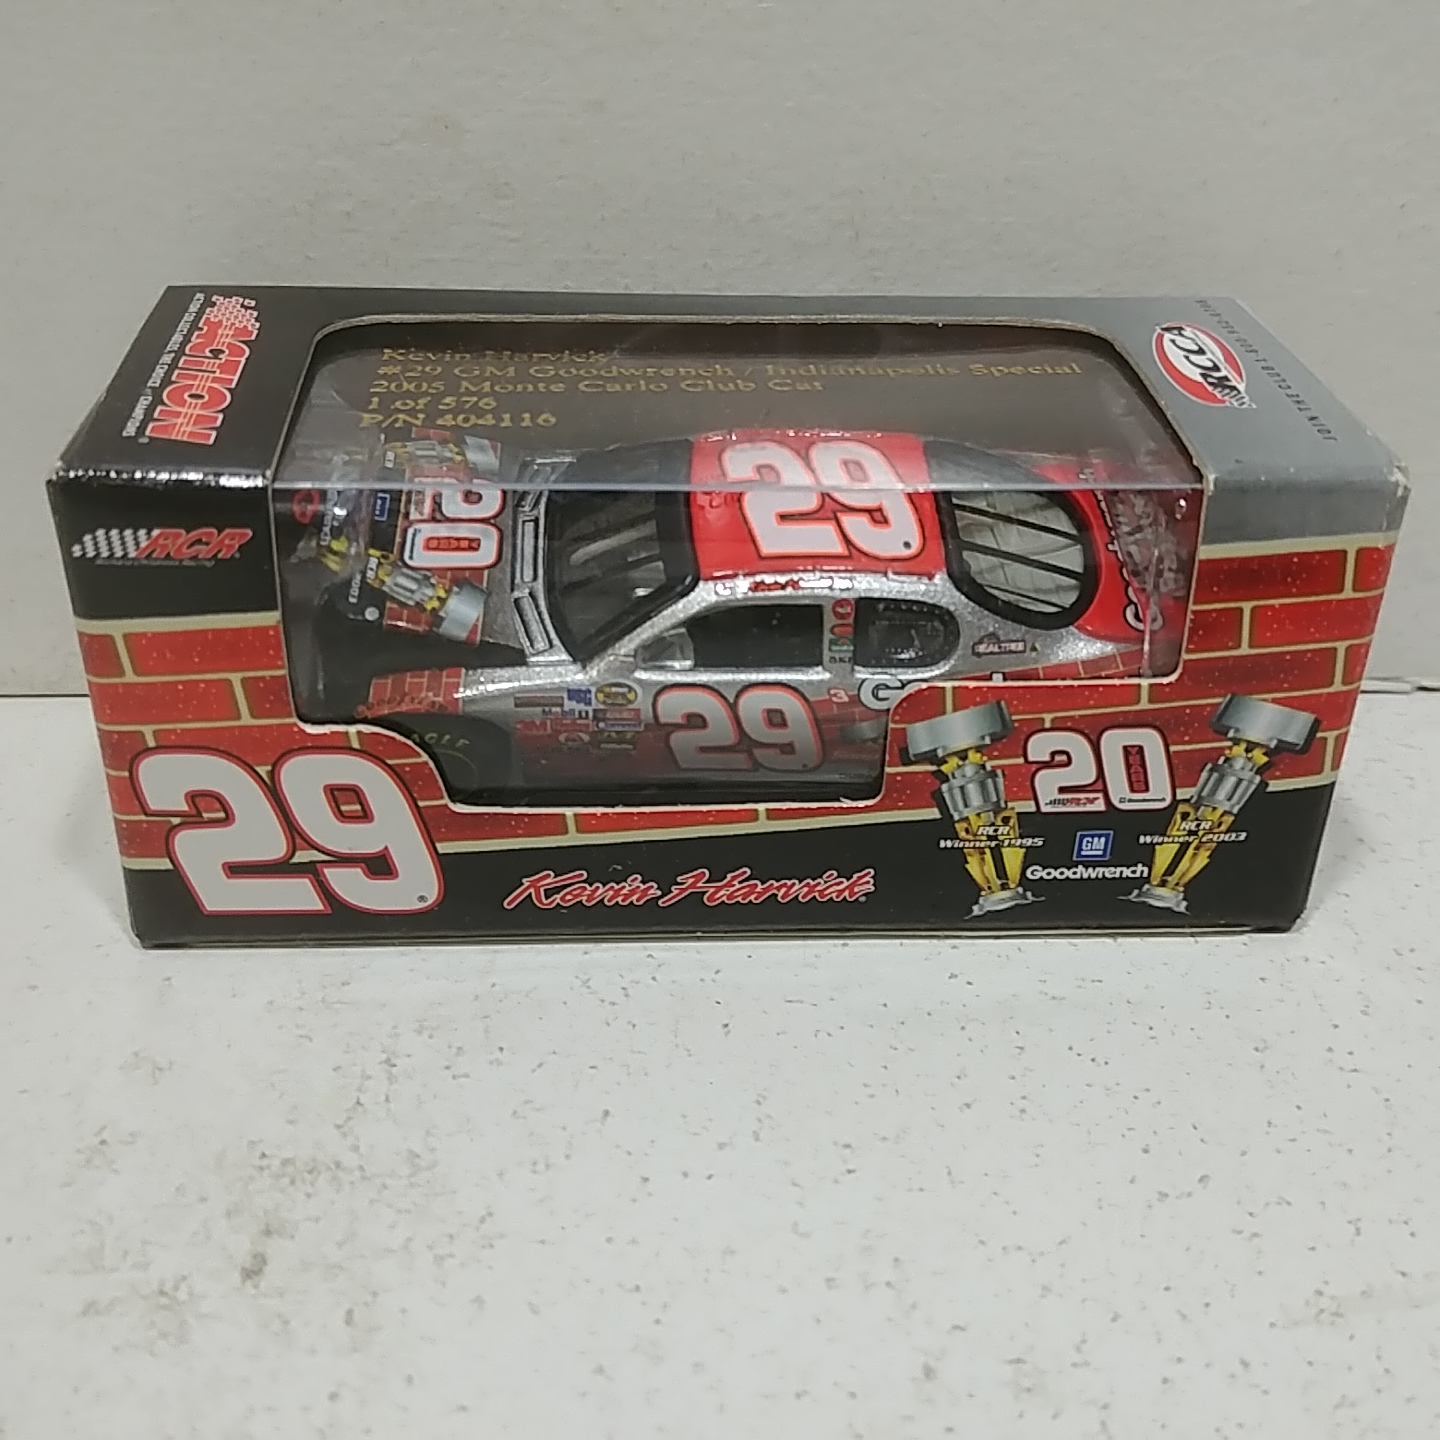 2005 Kevin Harvick 1/64th Goodwrench "Indianapolis Special" RCCA hood open Monte Carlo